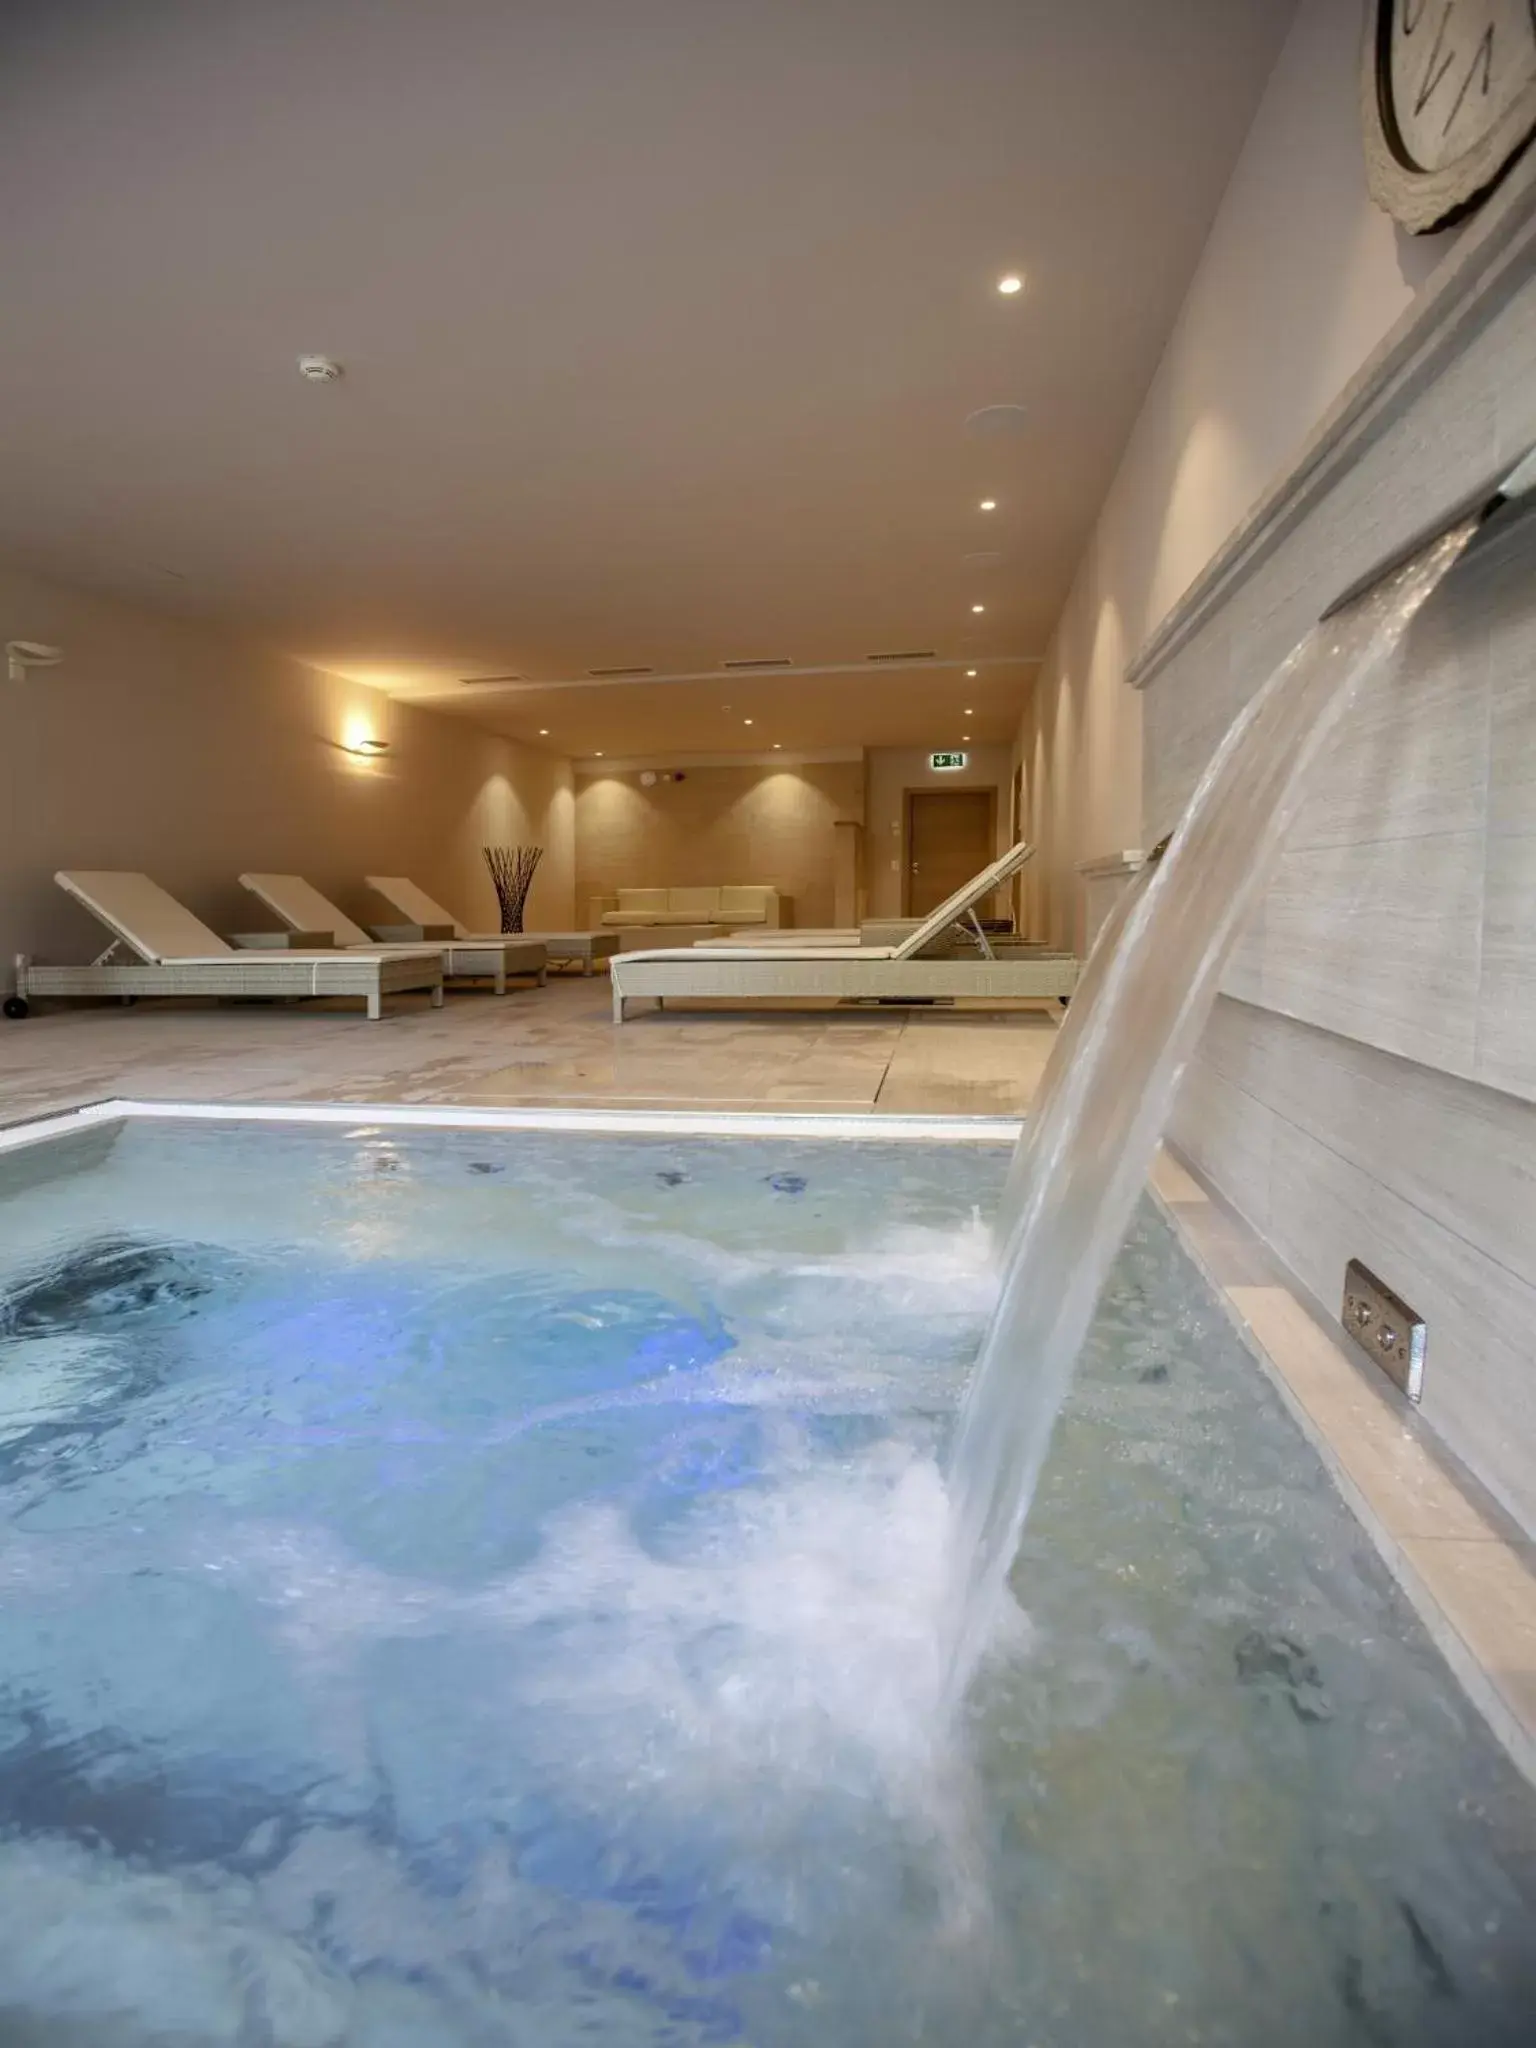 Hot Spring Bath, Swimming Pool in Parkhotel Delta, Wellbeing Resort